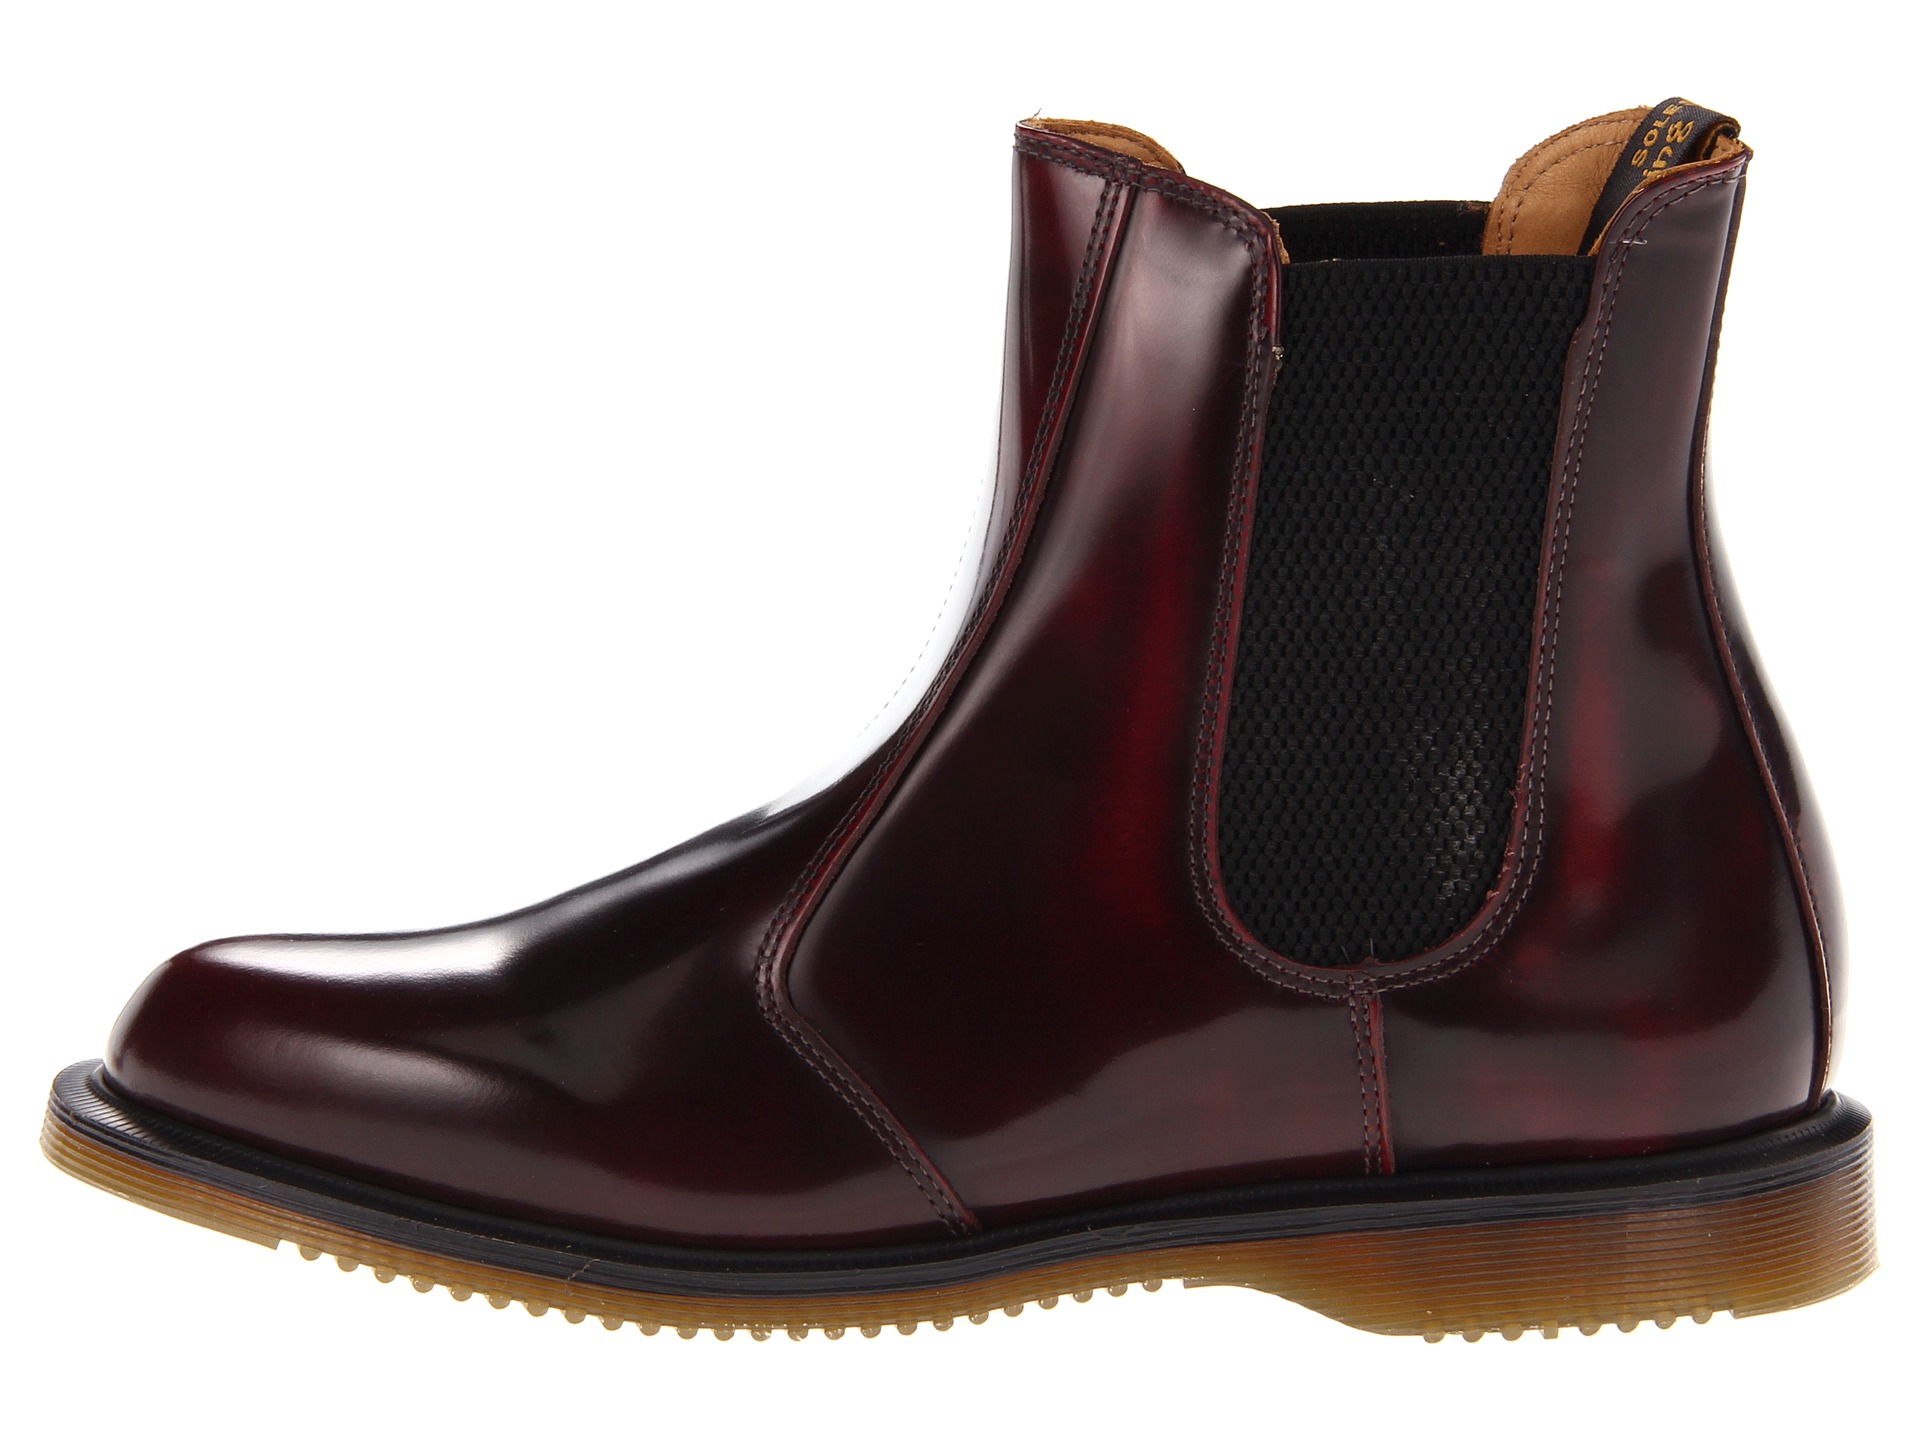 Dr. Martens Flora Chelsea Boot - Zappos.com Free Shipping BOTH Ways